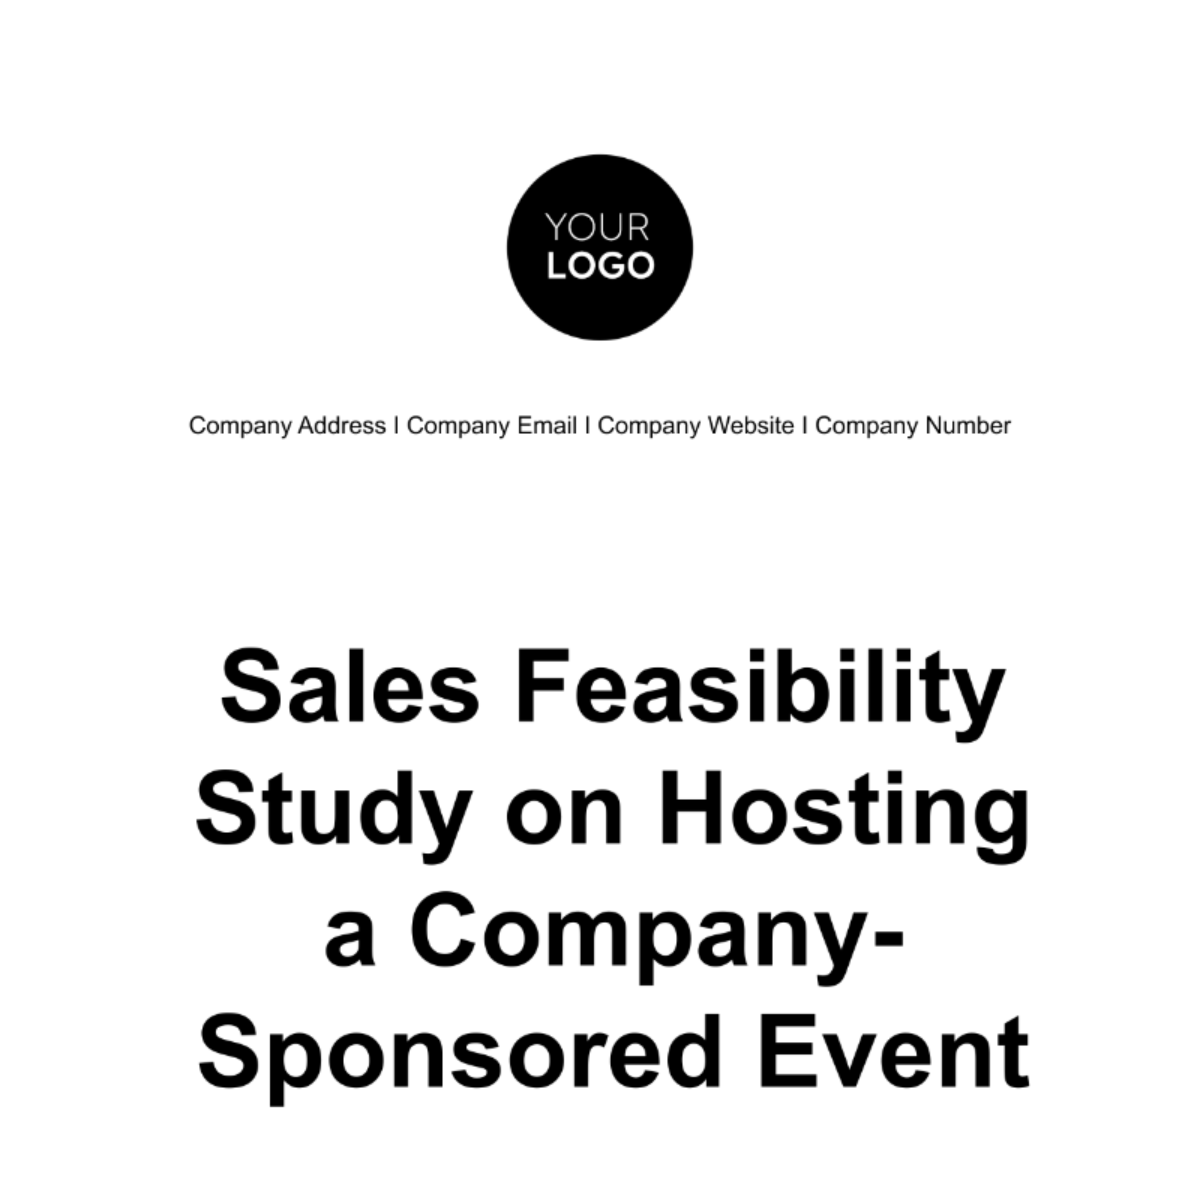 Sales Feasibility Study on Hosting a Company-Sponsored Event Template